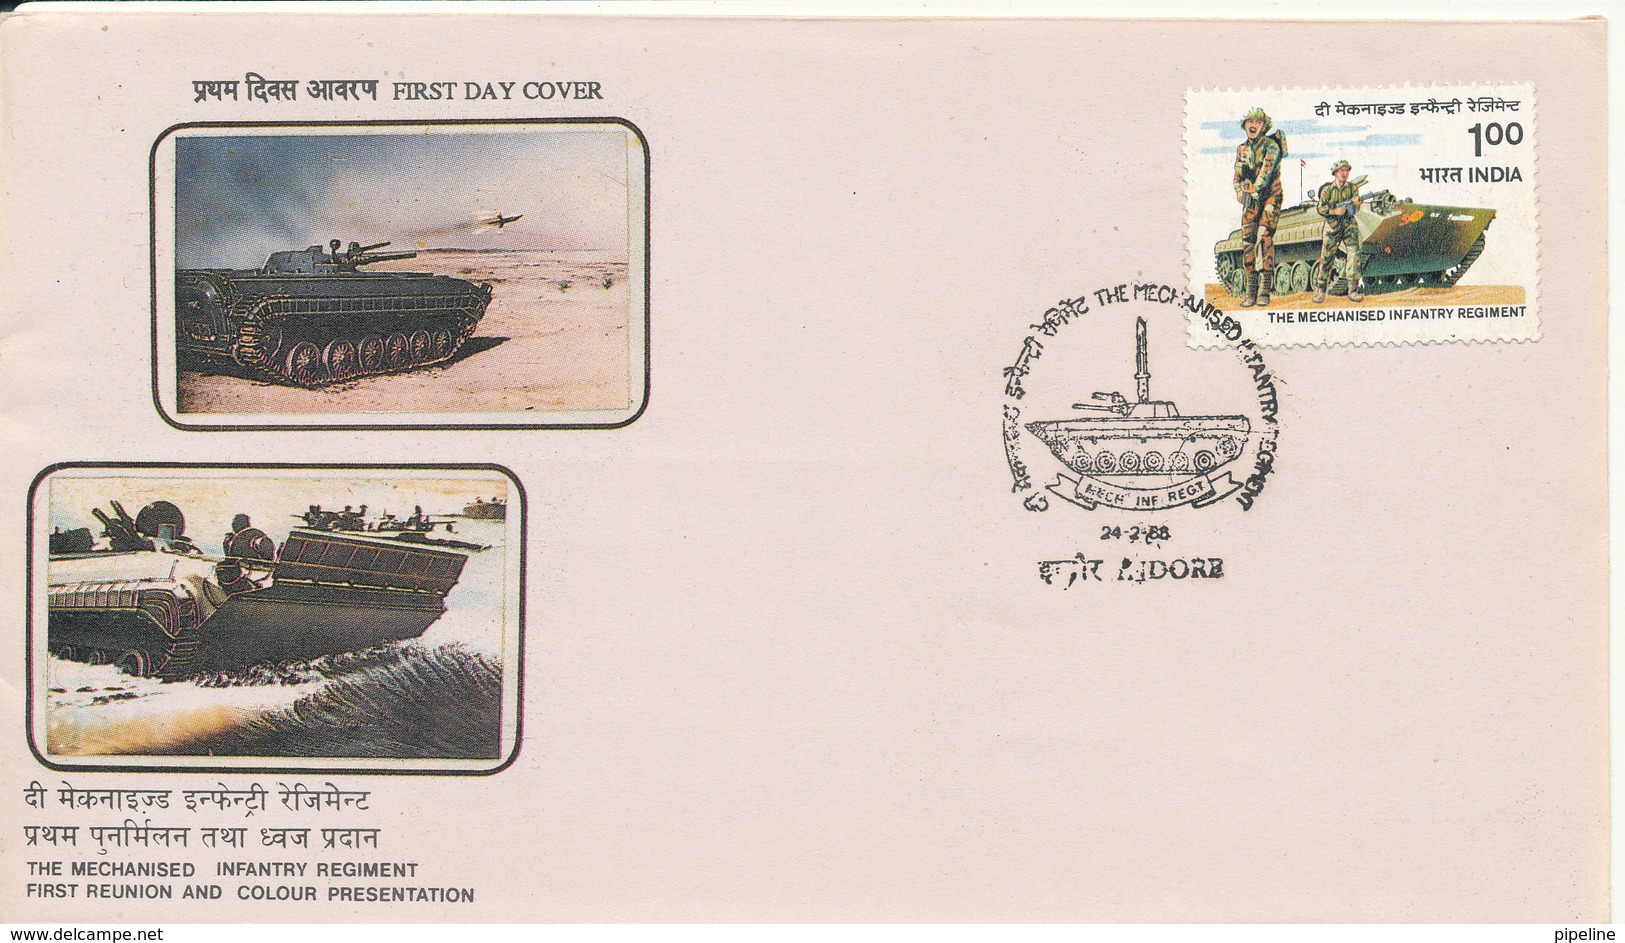 India FDC Indore 24-2-1988 The Mechanised Infantery Regiment First Reunion And Colour Presentation With Cachet - FDC